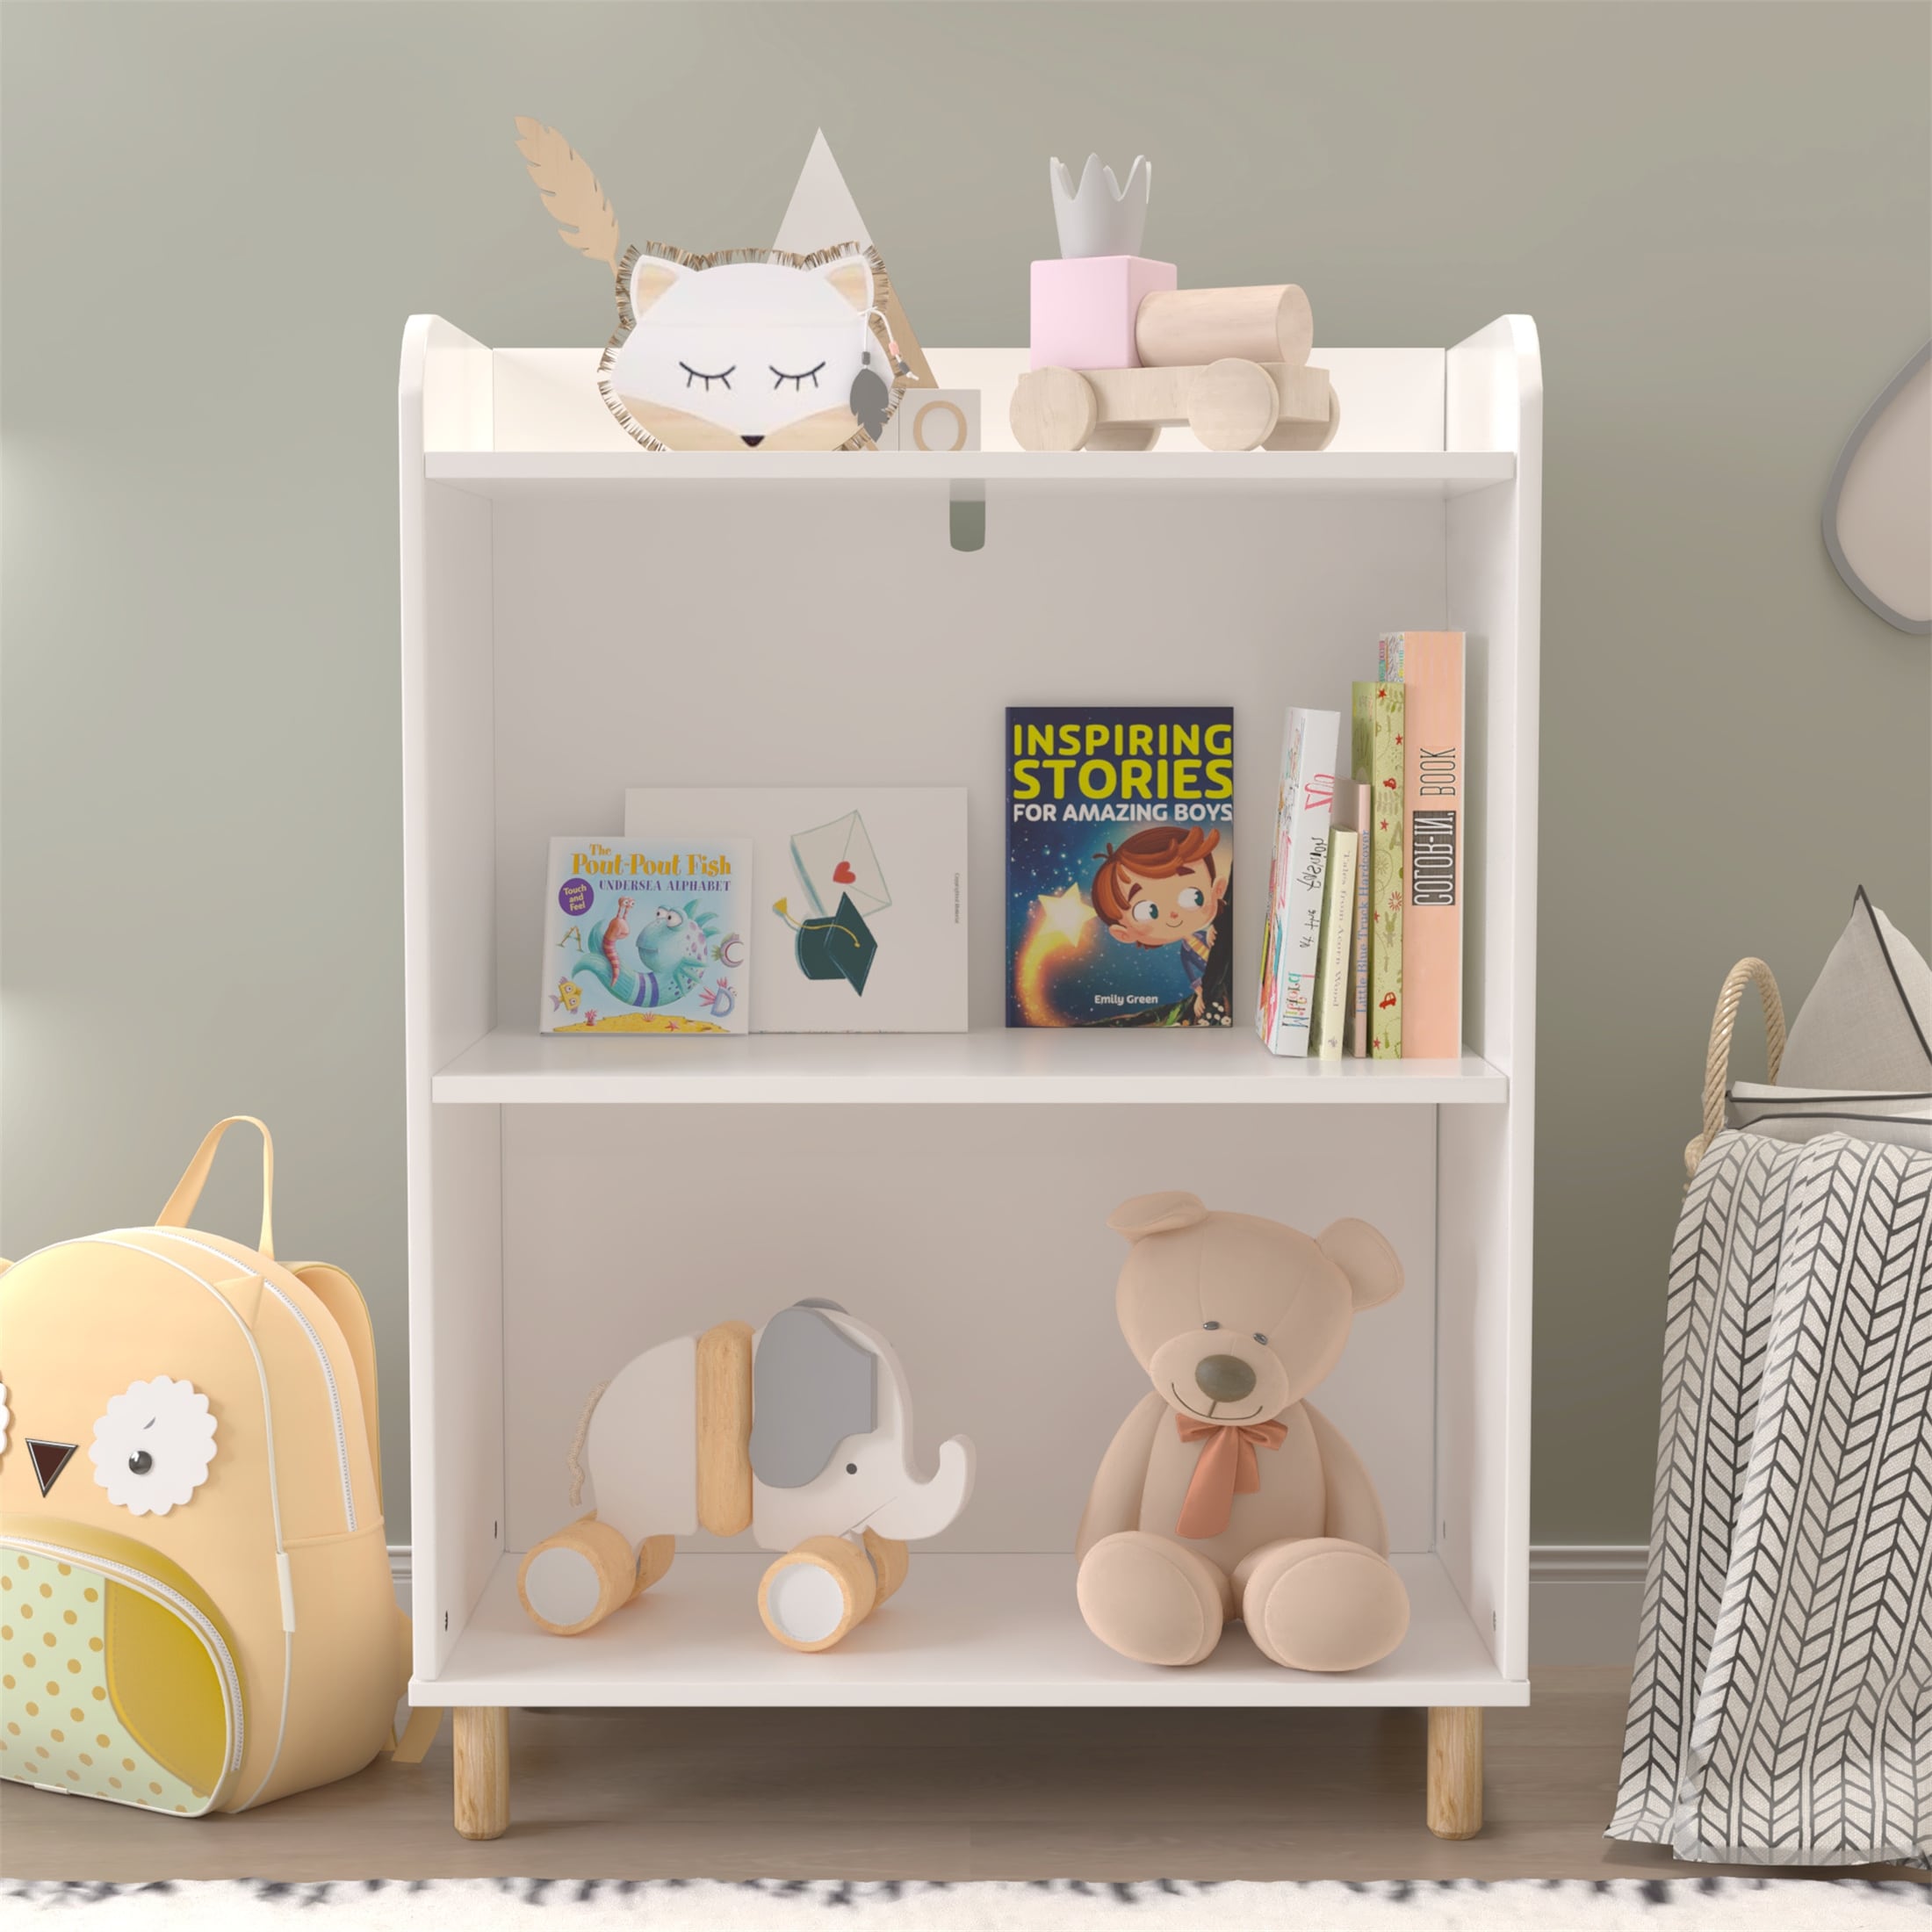 https://ak1.ostkcdn.com/images/products/is/images/direct/ebaff0c91a6234a13300842a642abcd1fb0464aa/Kids-3-Tier-Bookcase-Toy-Storage-Cabinet-Organizer.jpg